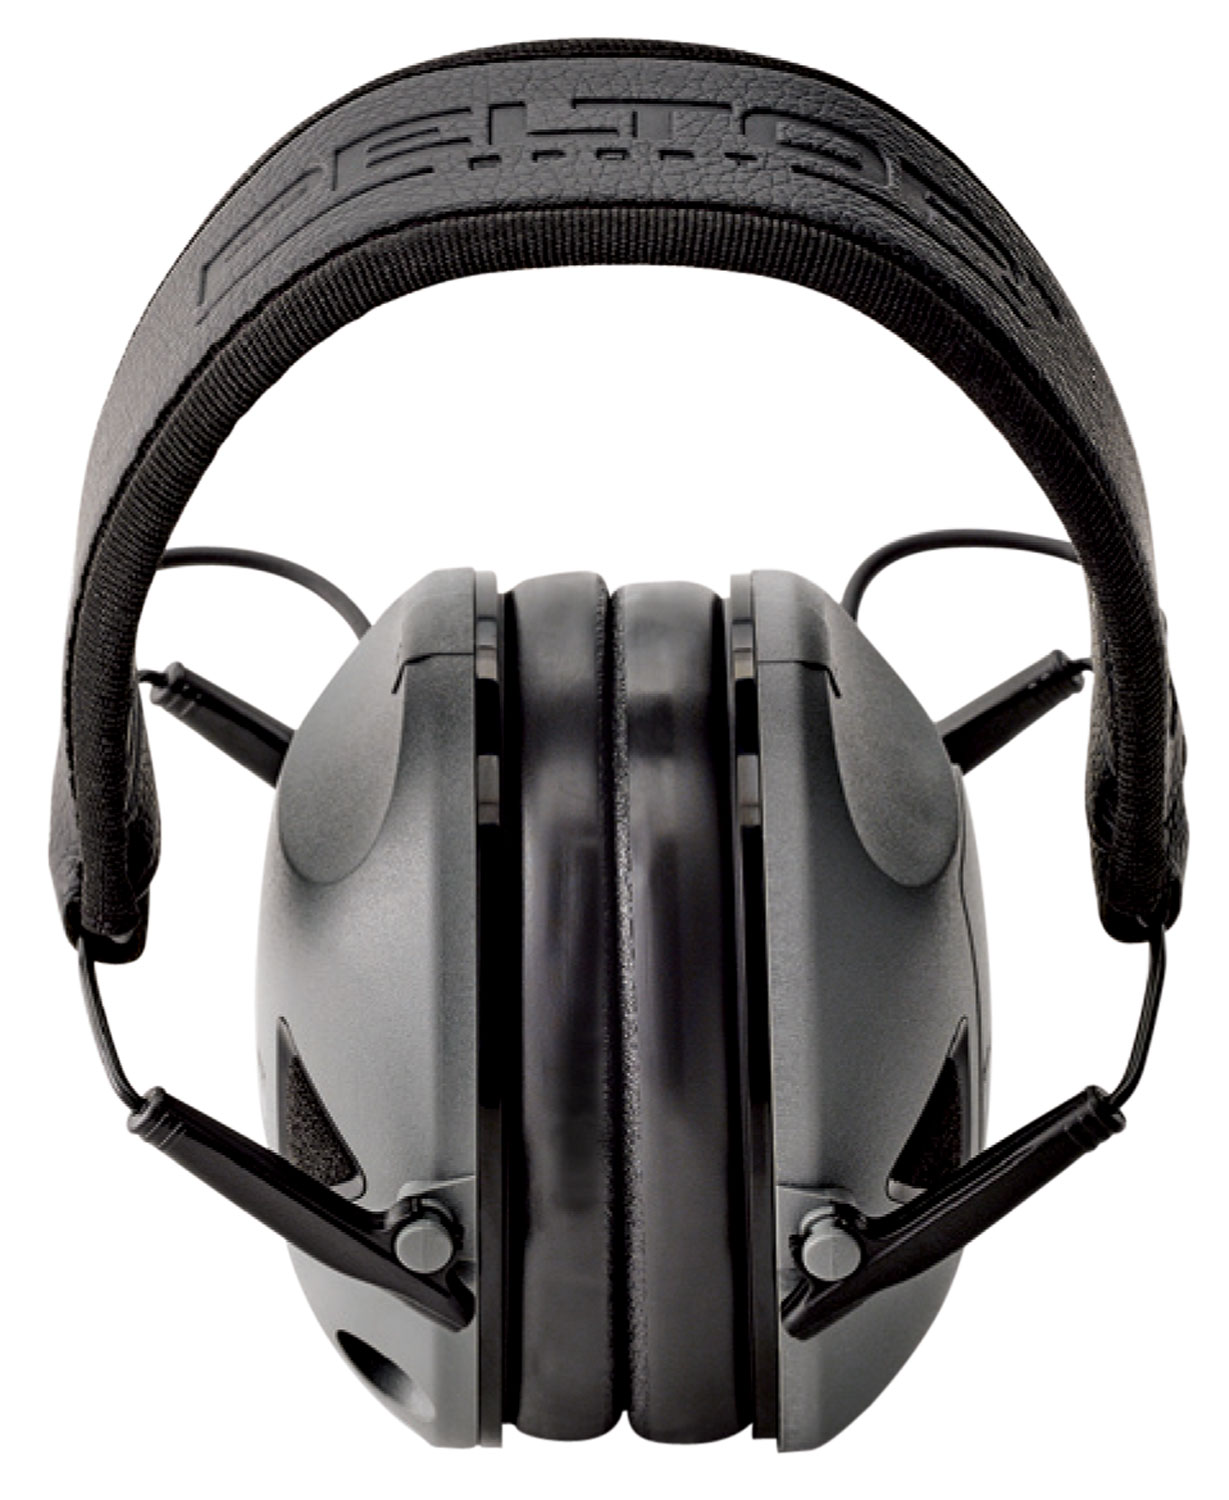 Peltor RGOTH4 Sport RangeGuard 21 dB Over the Head Gray Ear Cups with Adjustable Black Headband for Adults 1 Pair